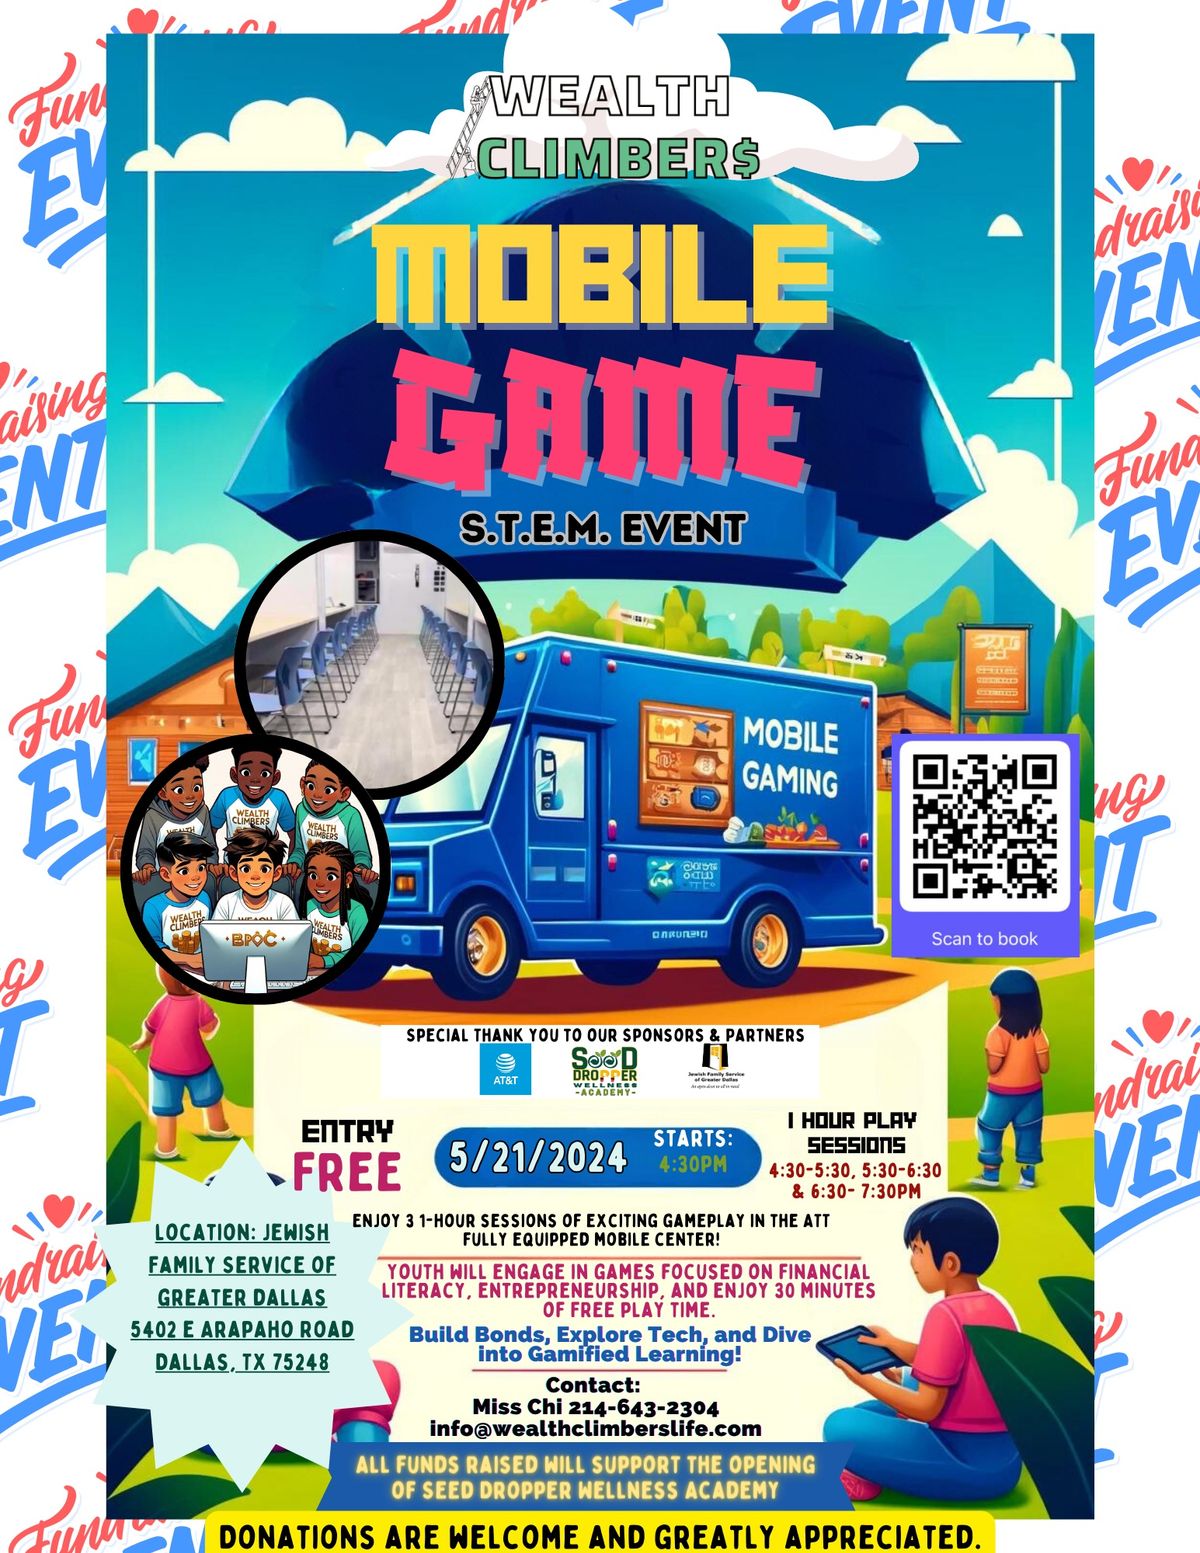 Wealth Climbers: Mobile Game S.T.E.M. Event